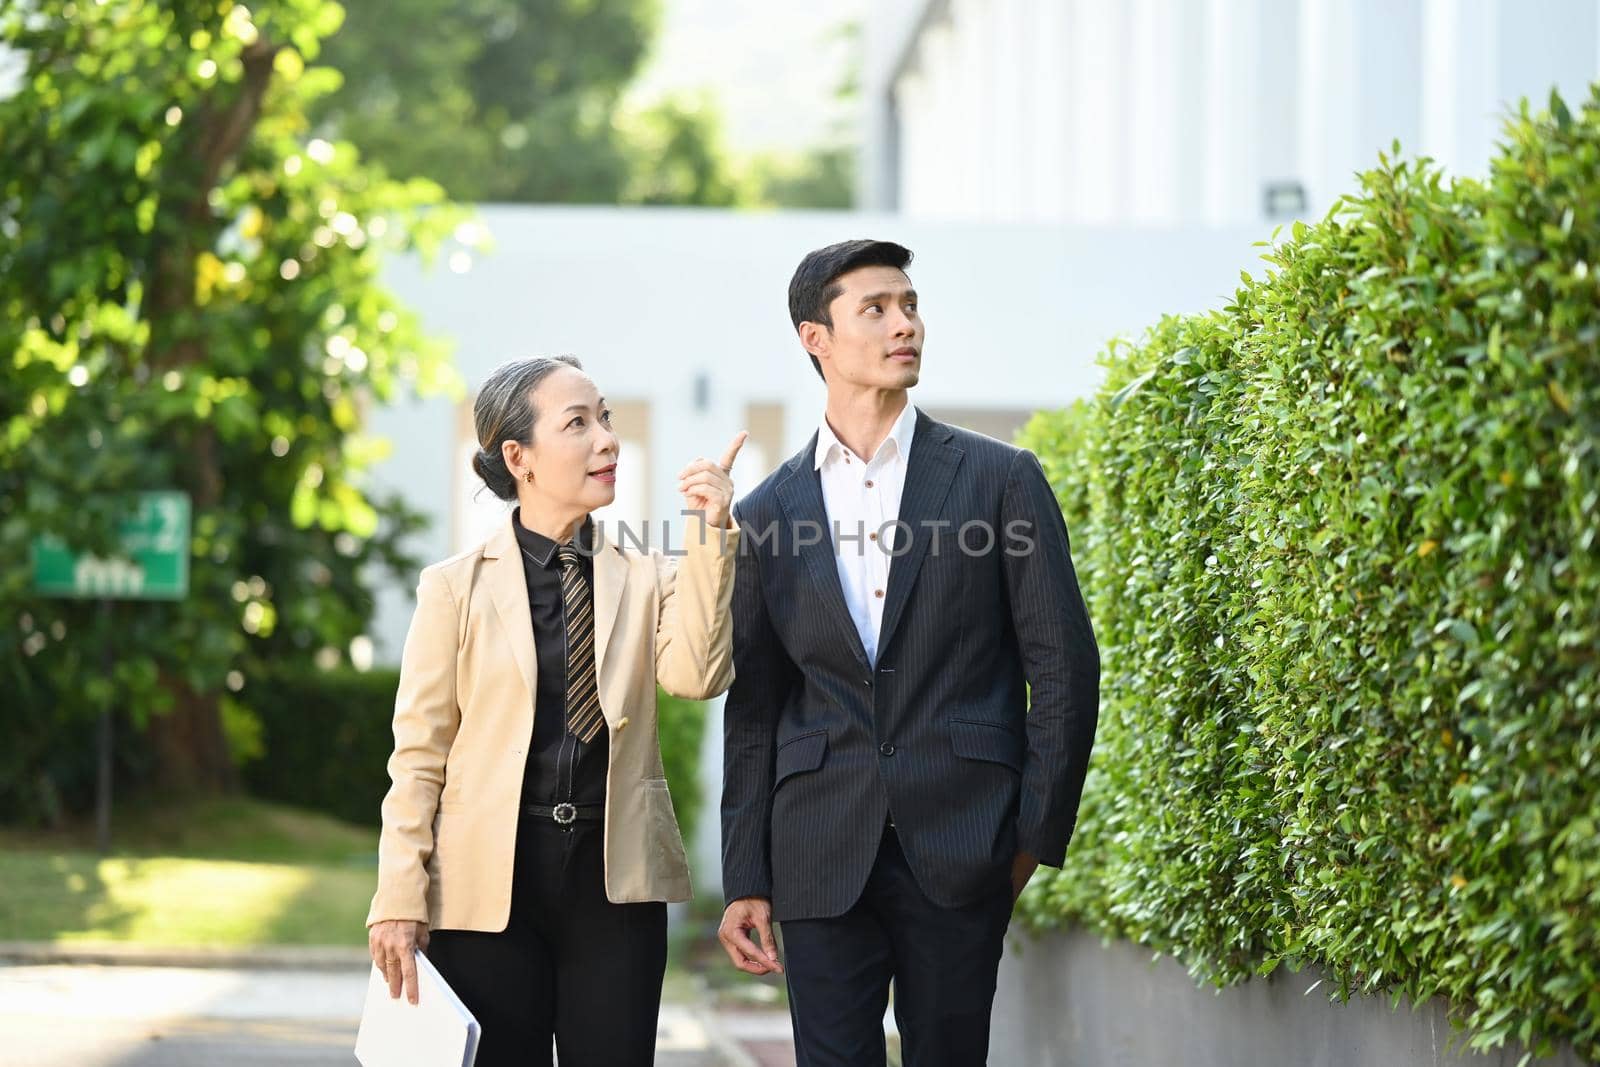 Two business people in formalwear discussing business while walking on street in modern city.